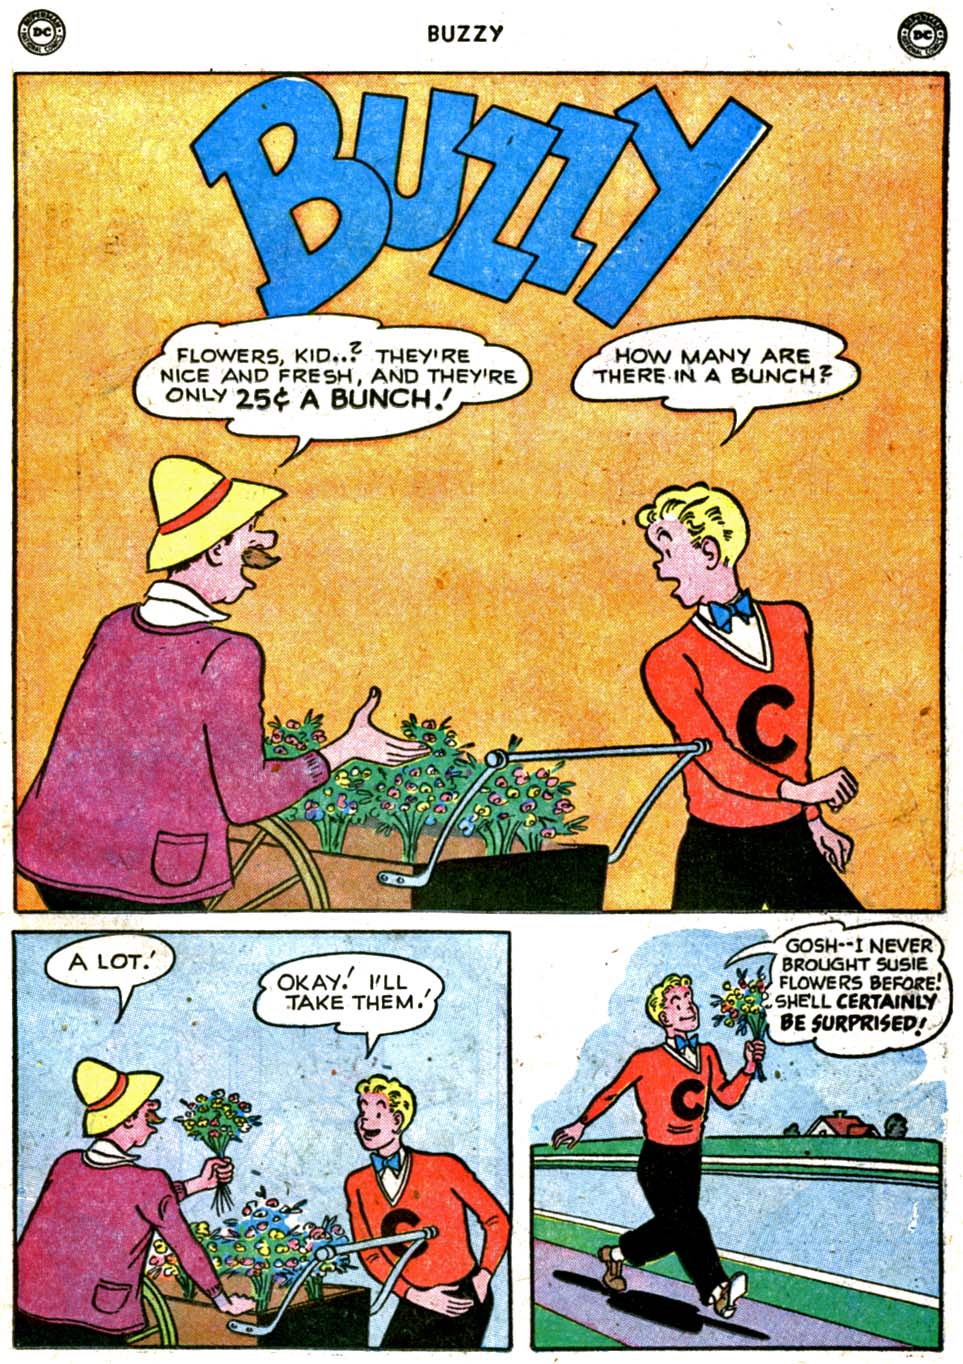 Read online Buzzy comic -  Issue #30 - 15